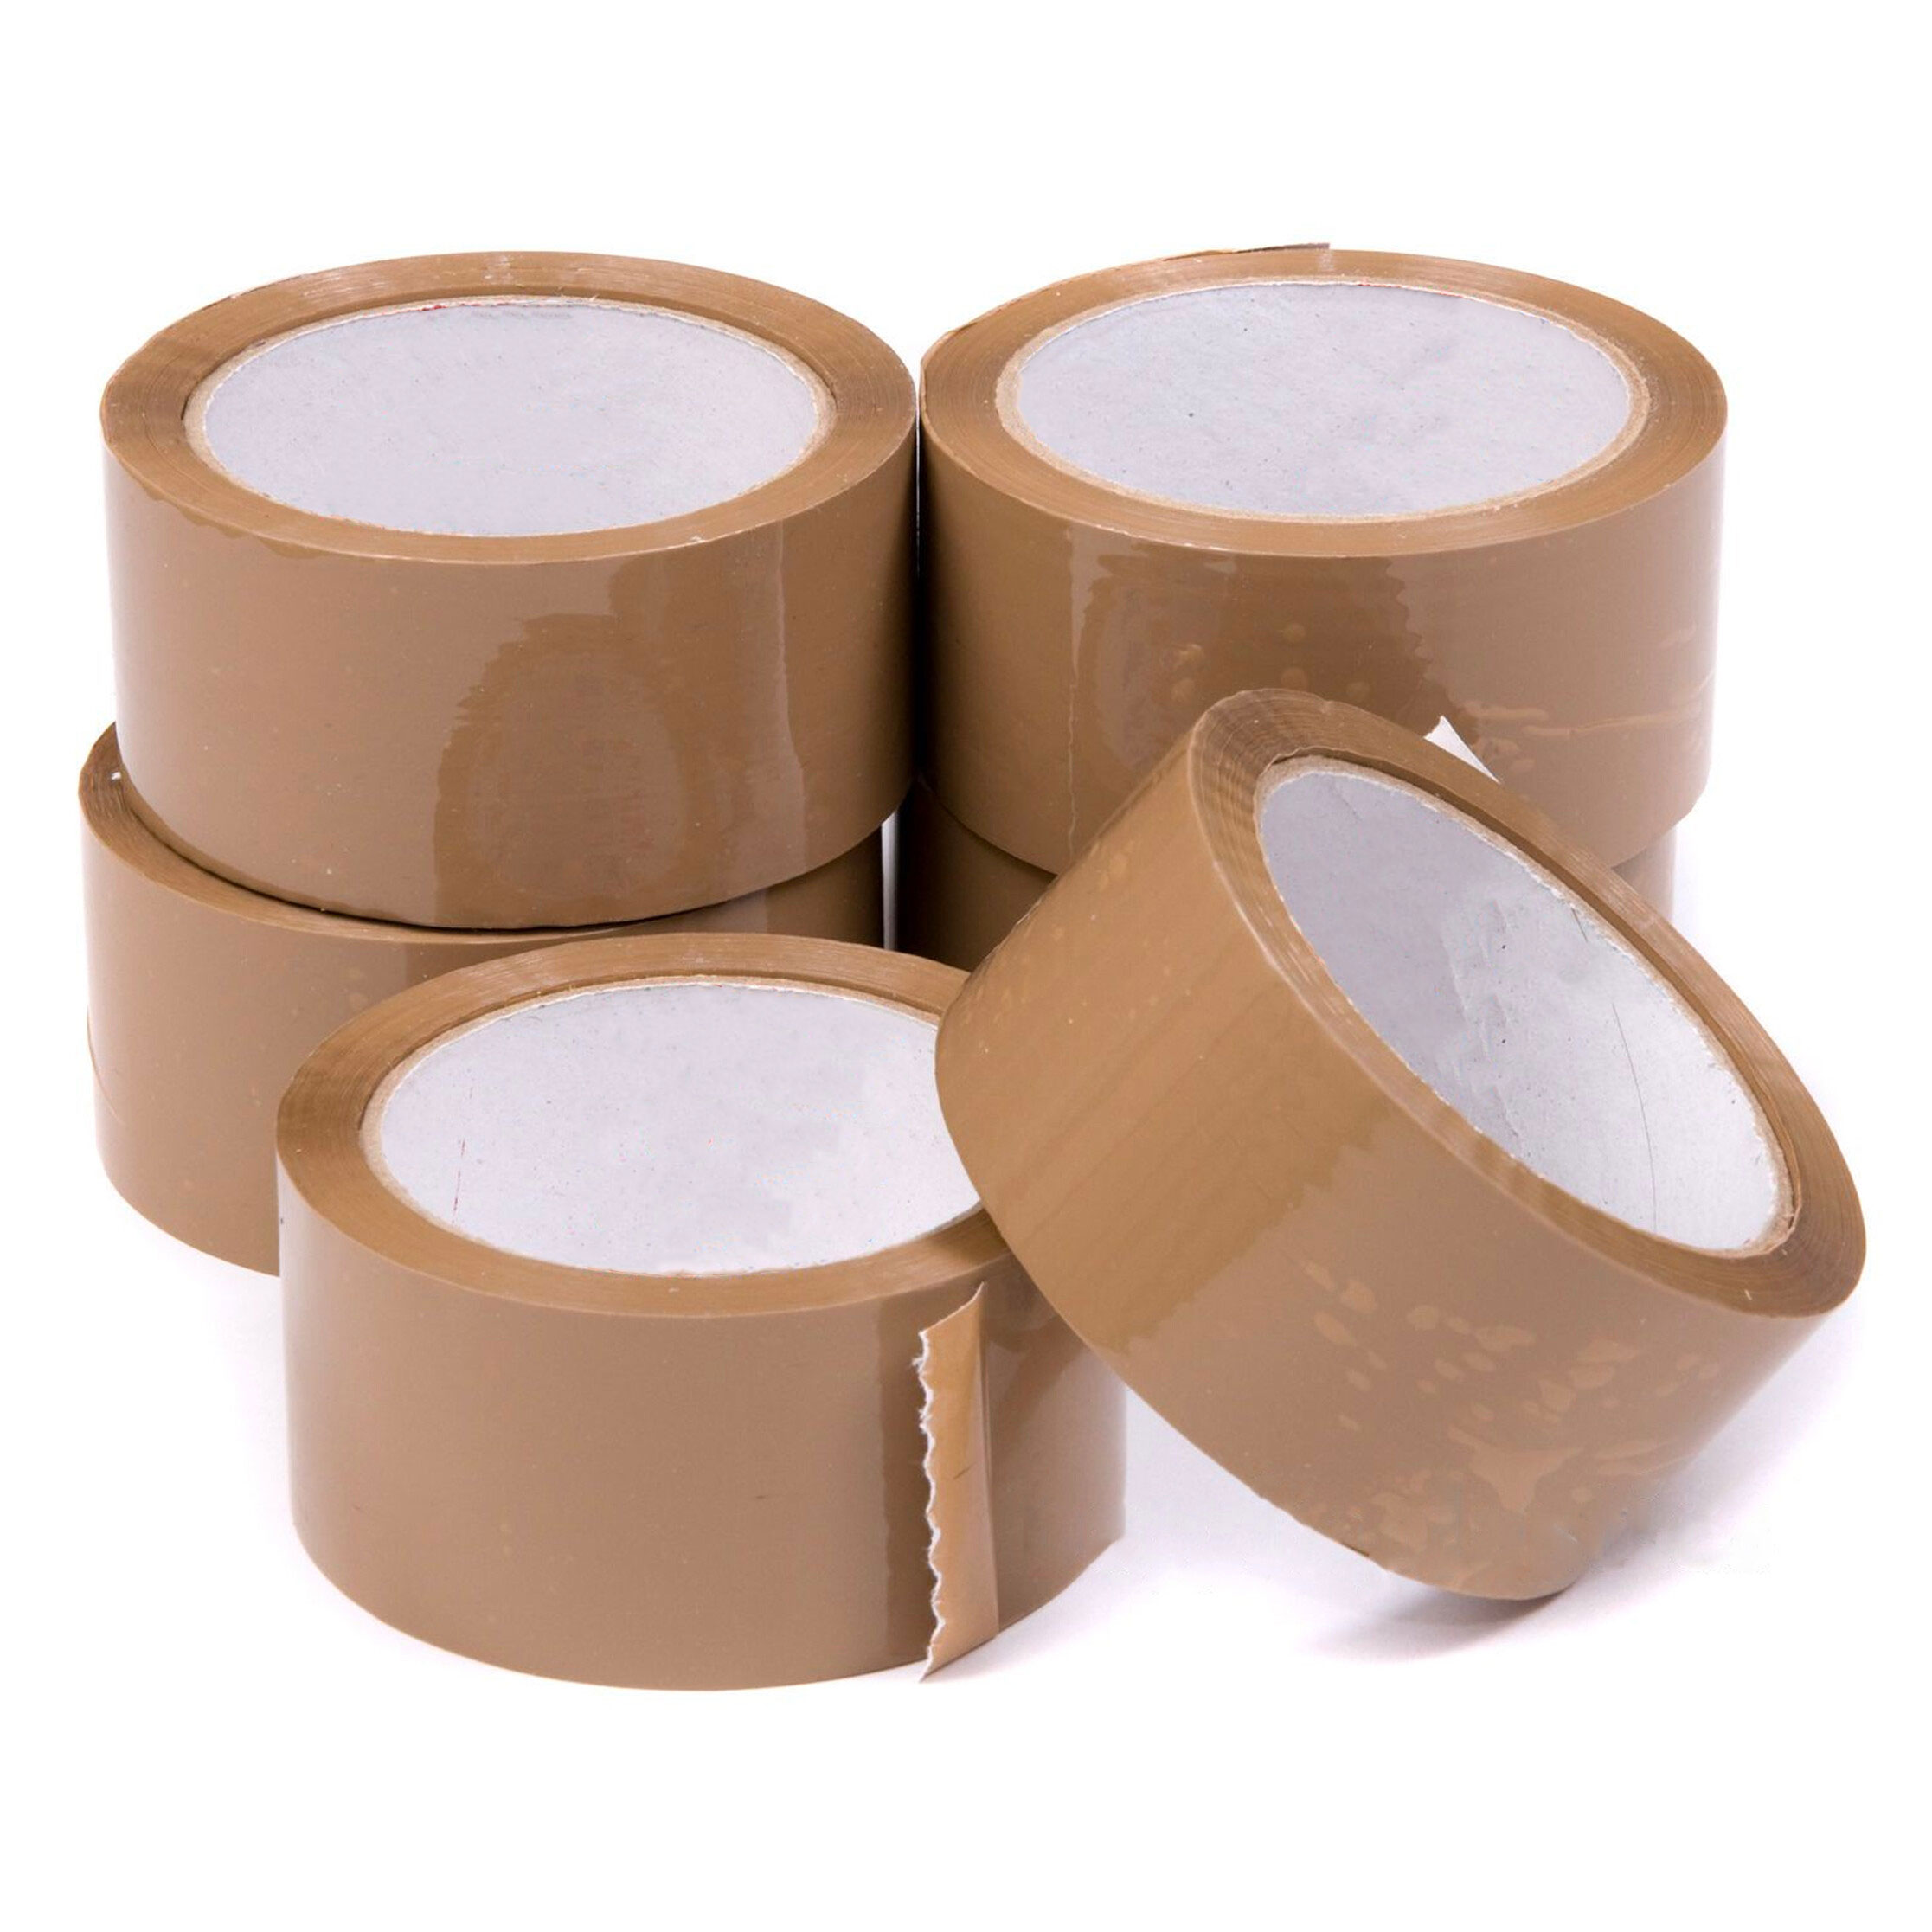 10 Strong Brown Buff Parcel Packaging Packing Tape 48MM X 66M Box Sealing Rolls 